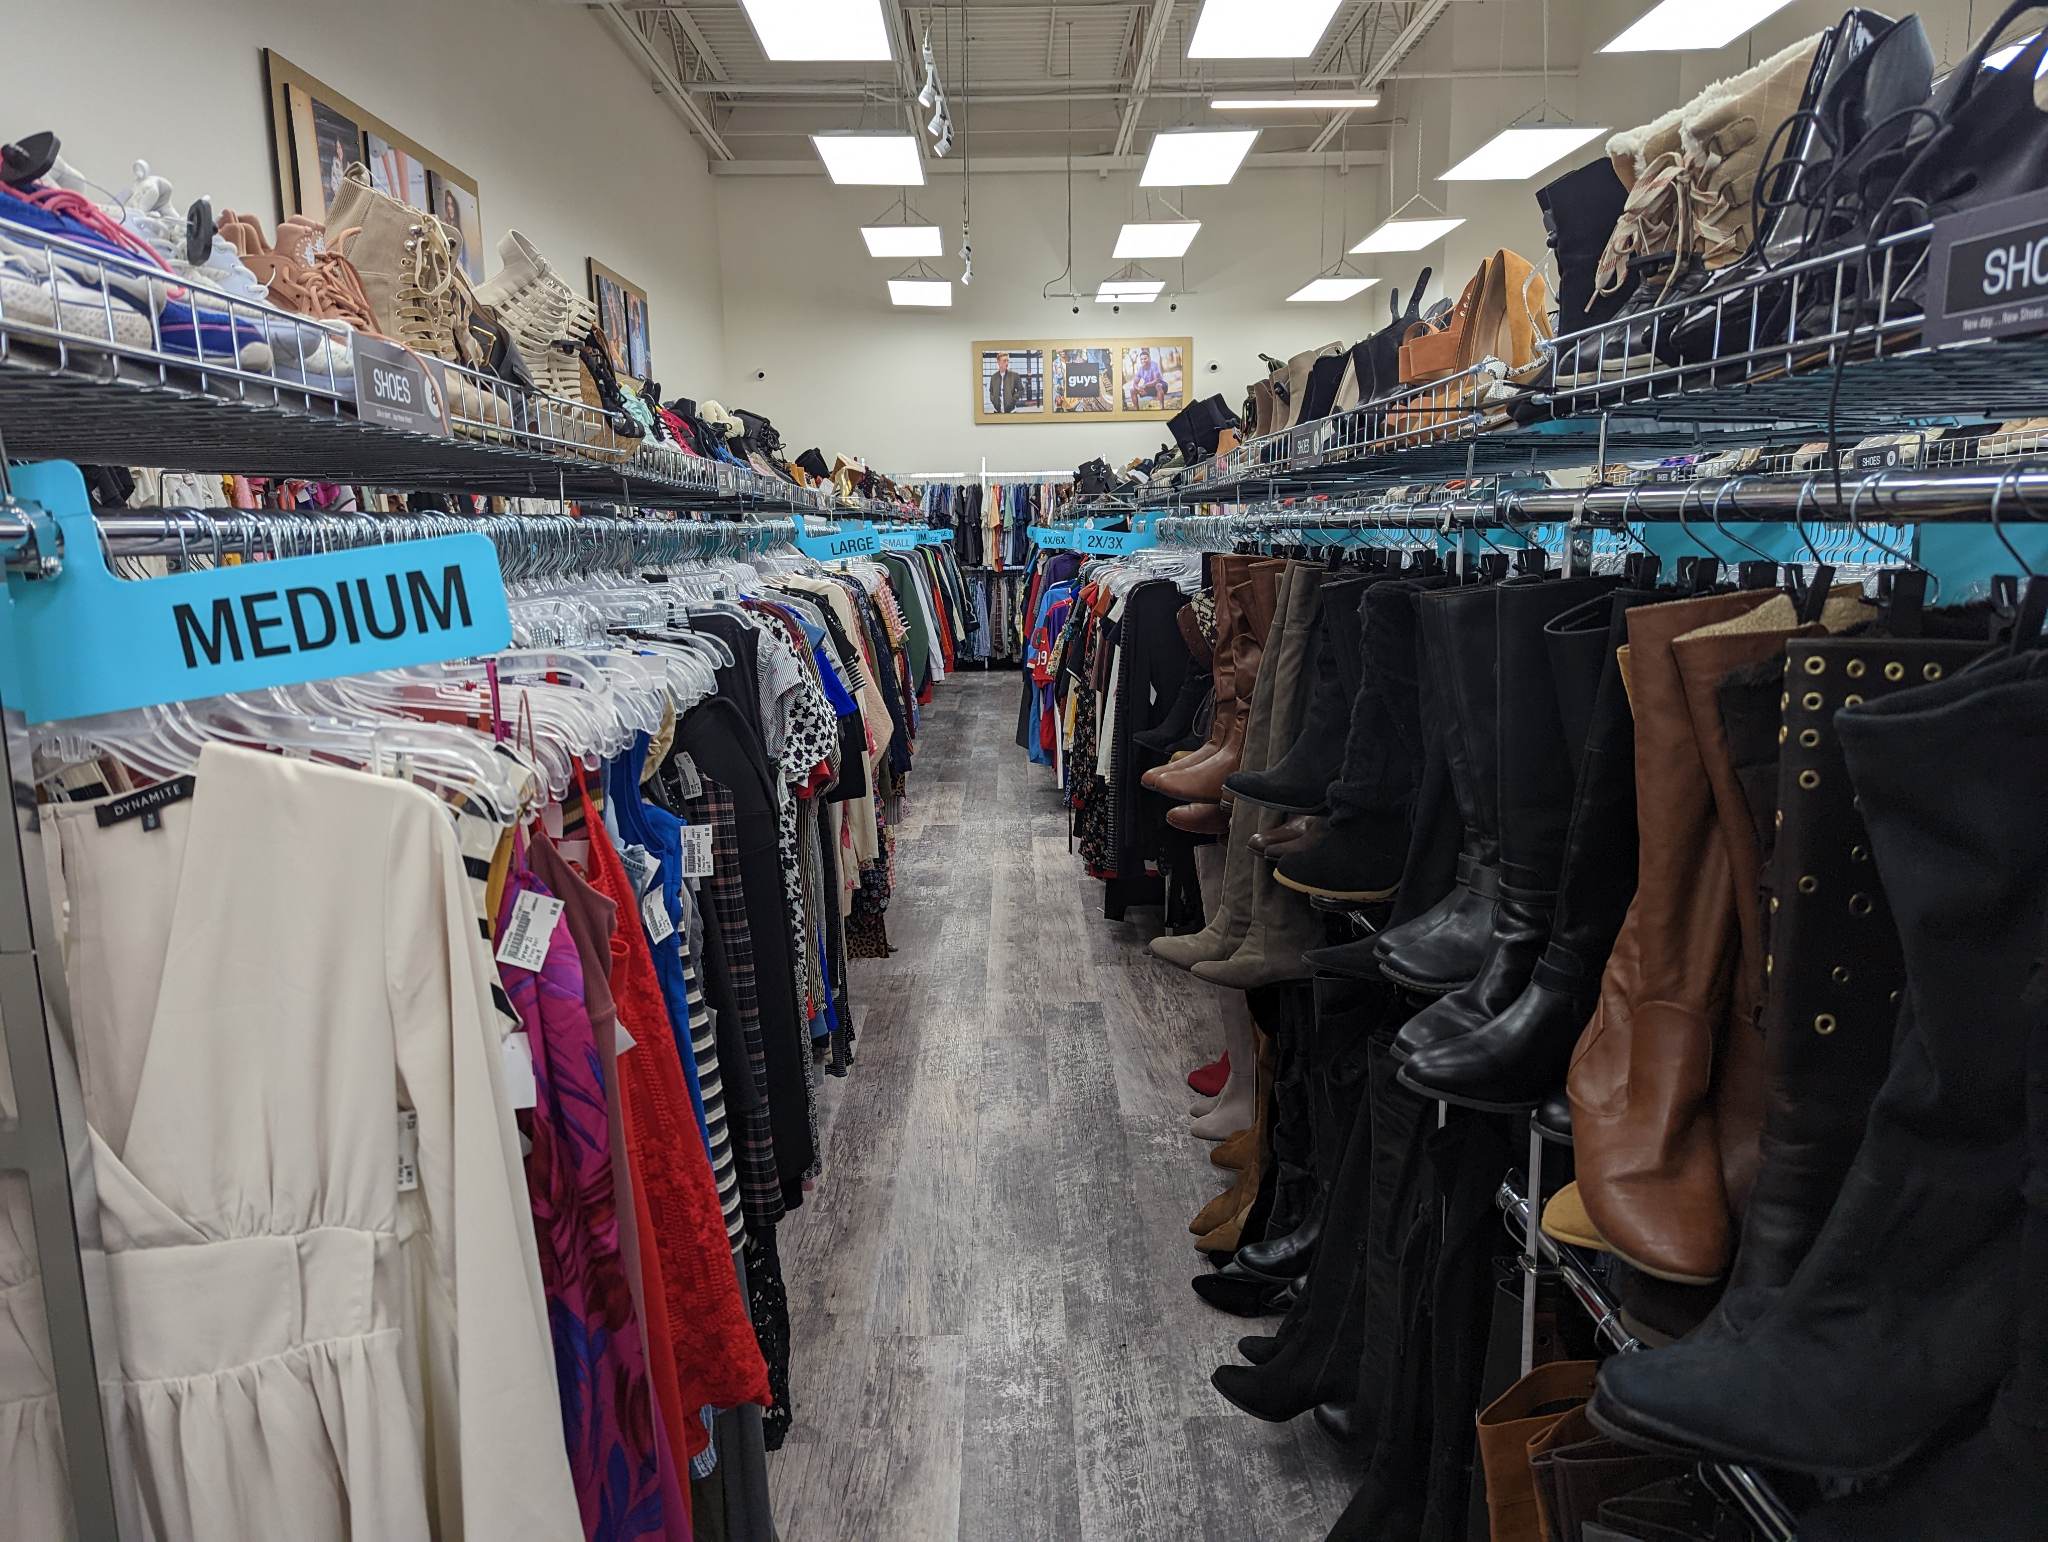 Plato's Closet Reopens in New, Larger Space